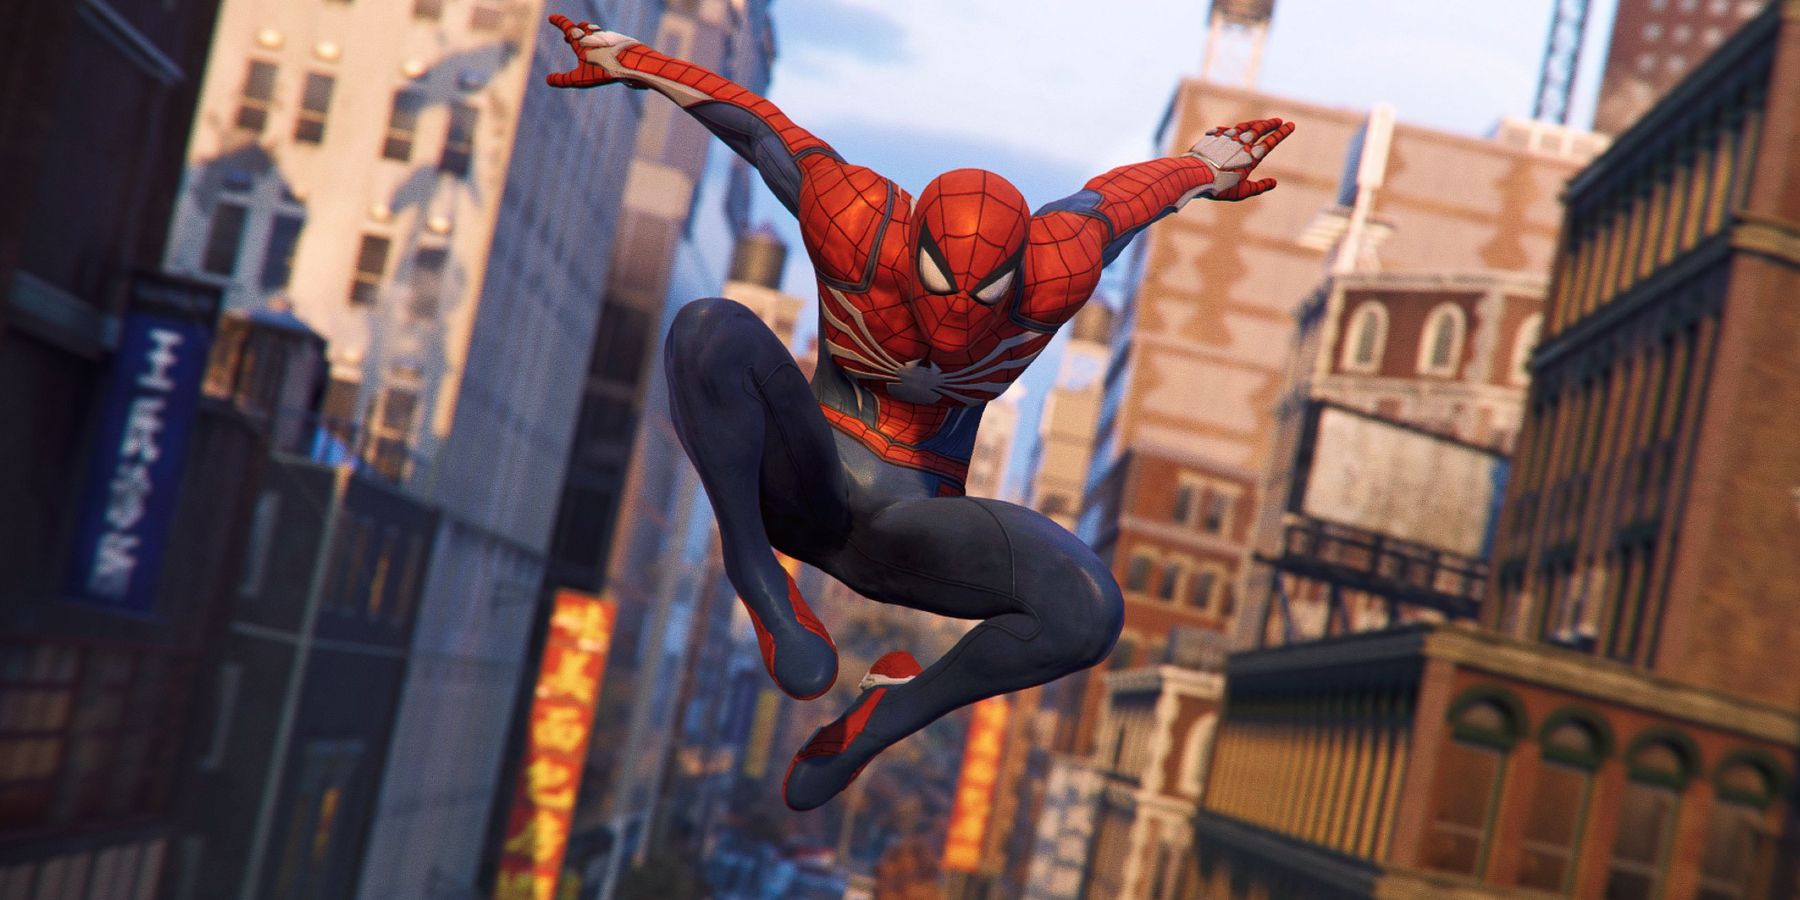 spider-man fan-made project unreal engine animations traversal